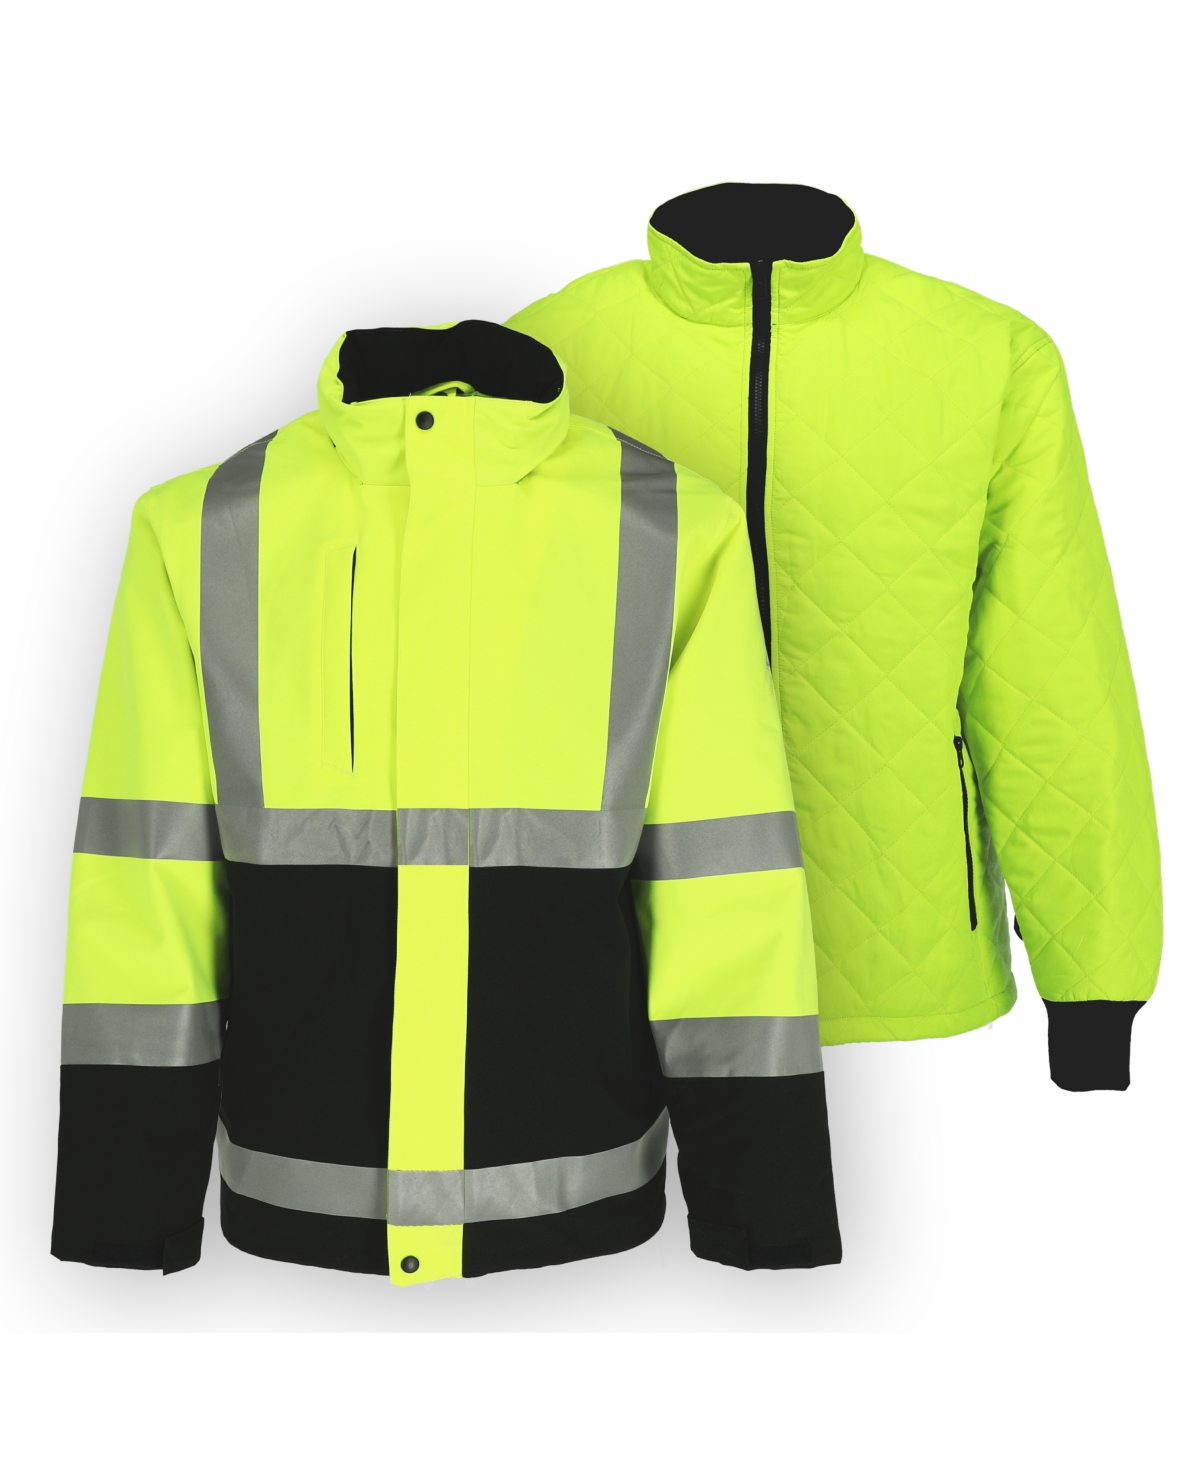 Men's HiVis 3-in-1 Insulated Rainwear Systems Jacket - Ansi Class 2 - Black/Lime